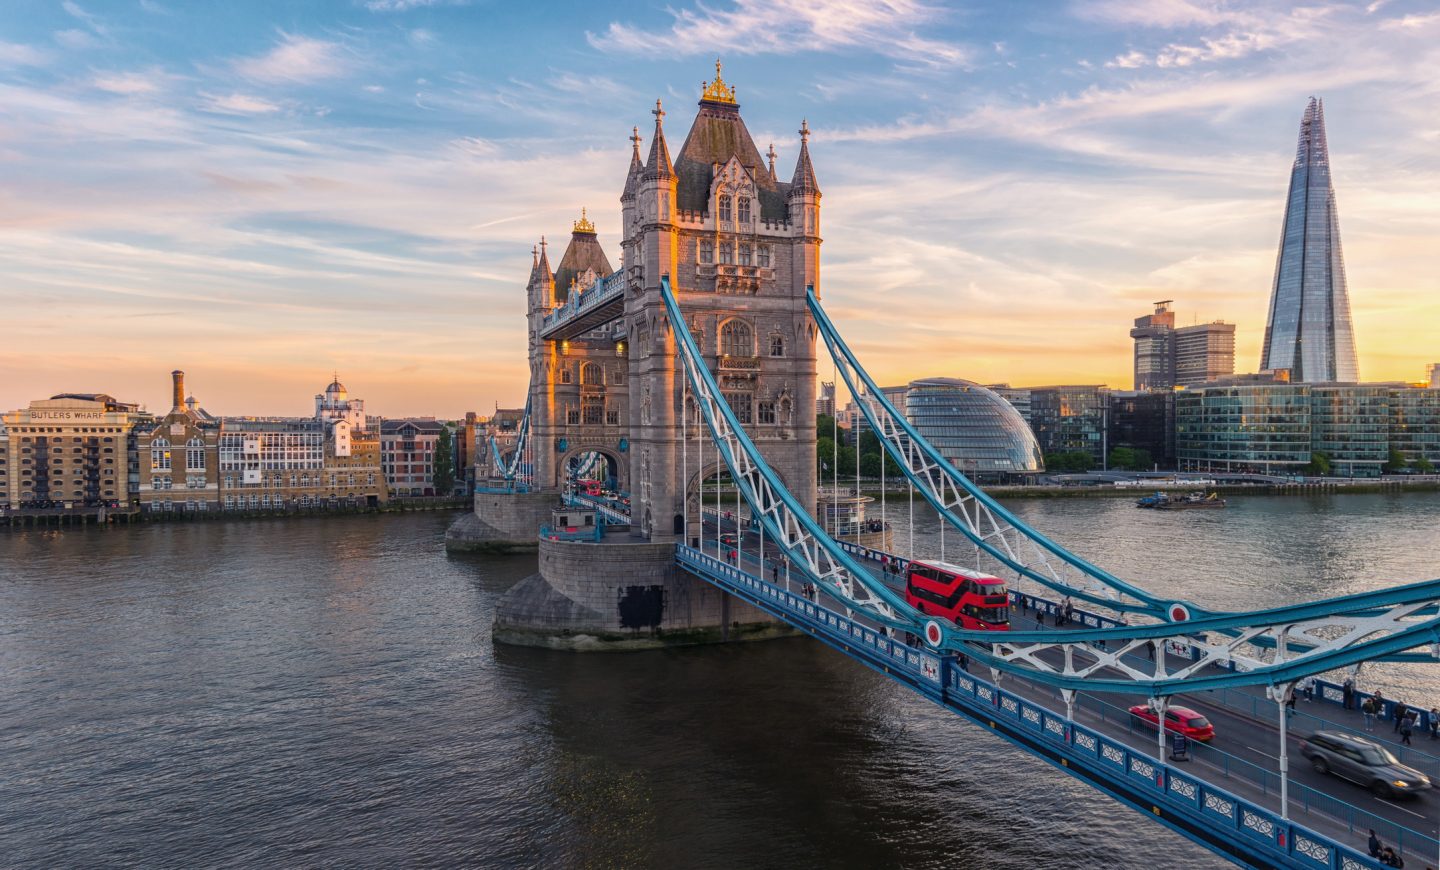 Sunset and skyline behind Tower Bridge in London on a beautiful evening